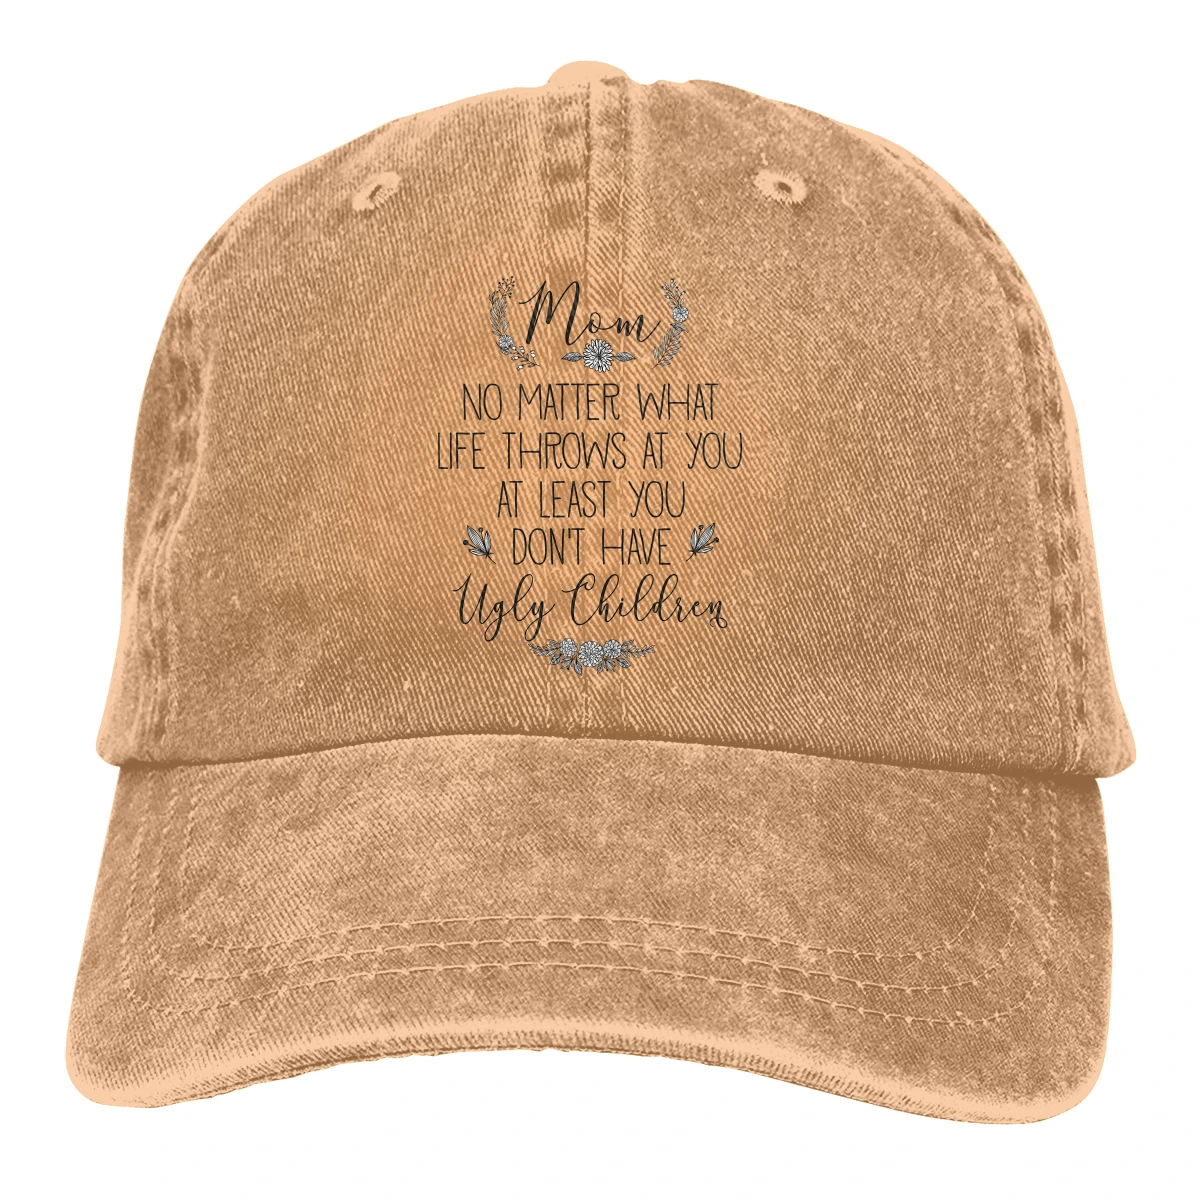 At Least You Don't Have Ugly Children mans womans Retro Washed Cowboy hat Dad Cap